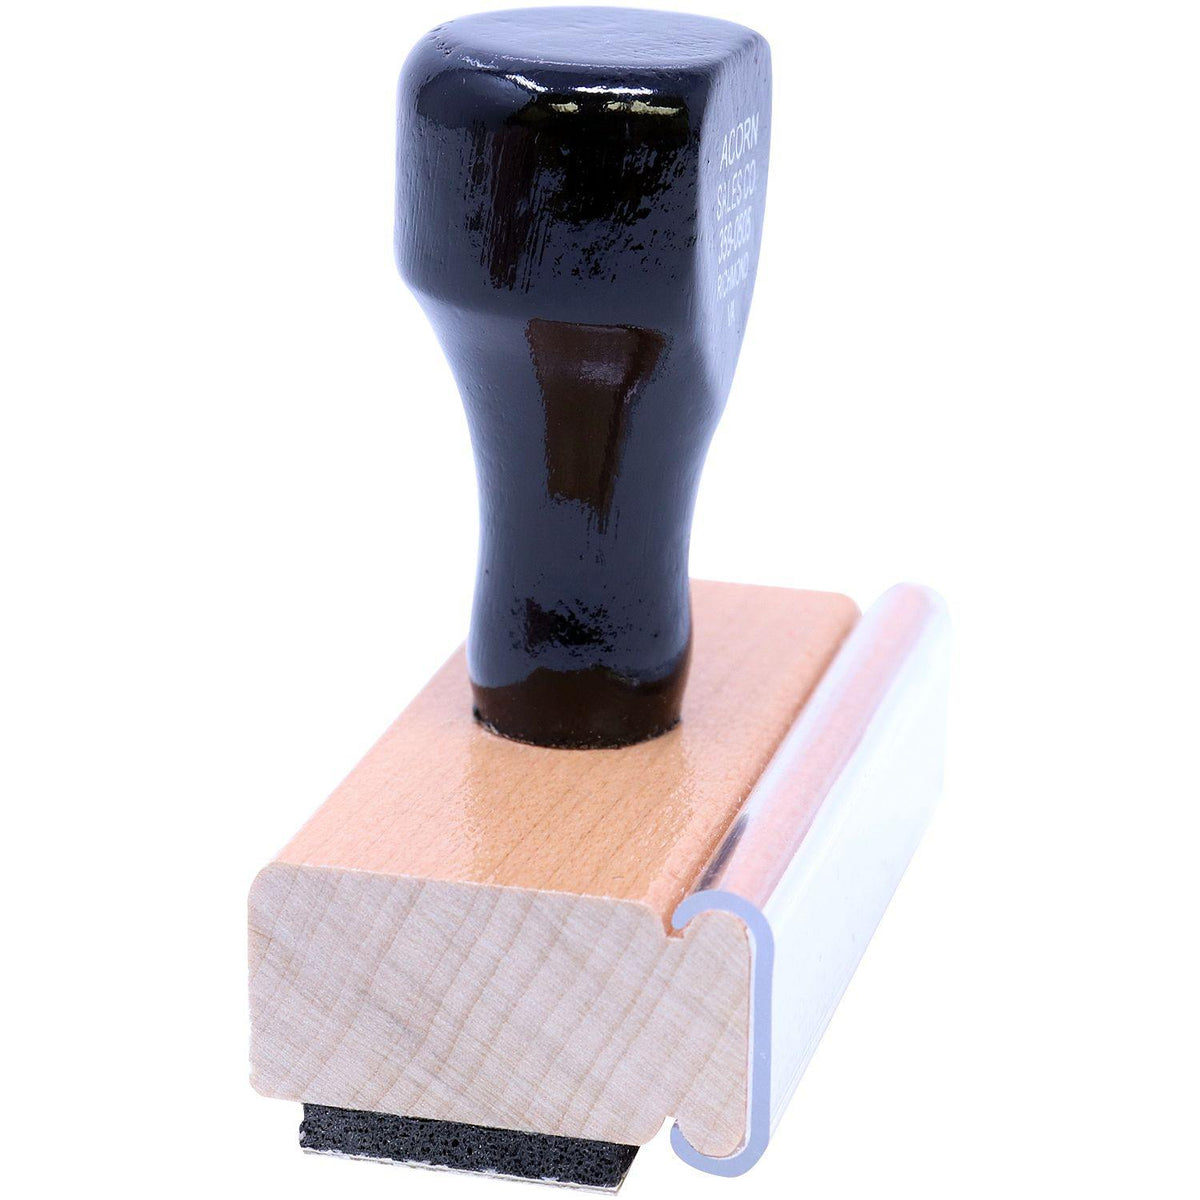 Side View of Air Mail Par Avion Rubber Stamp at an Angle